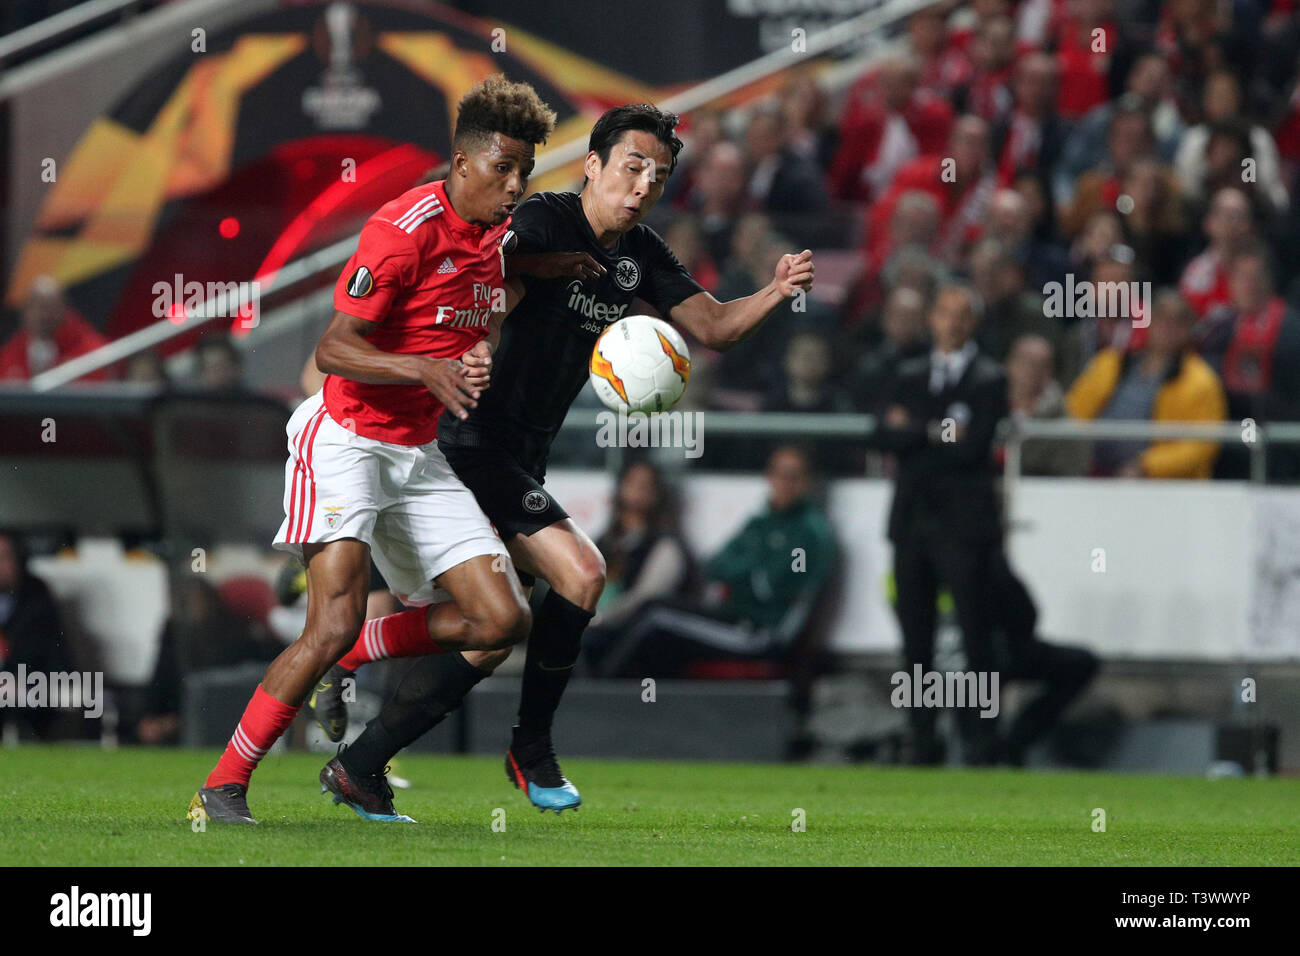 Lisbon, Portugal. 11th Apr, 2019. Benfica's Portuguese midfielder Gedson Fernandes (L) vies with Eintracht Frankfurt's defender Makoto Hasebe of Japan during the UEFA Europa League Quarter-Finals 1st Leg football match SL Benfica vs Eintracht Frankfurt at the Luz Stadium in Lisbon, Portugal, on April 11, 2019. Credit: Pedro Fiuza/ZUMA Wire/Alamy Live News Stock Photo